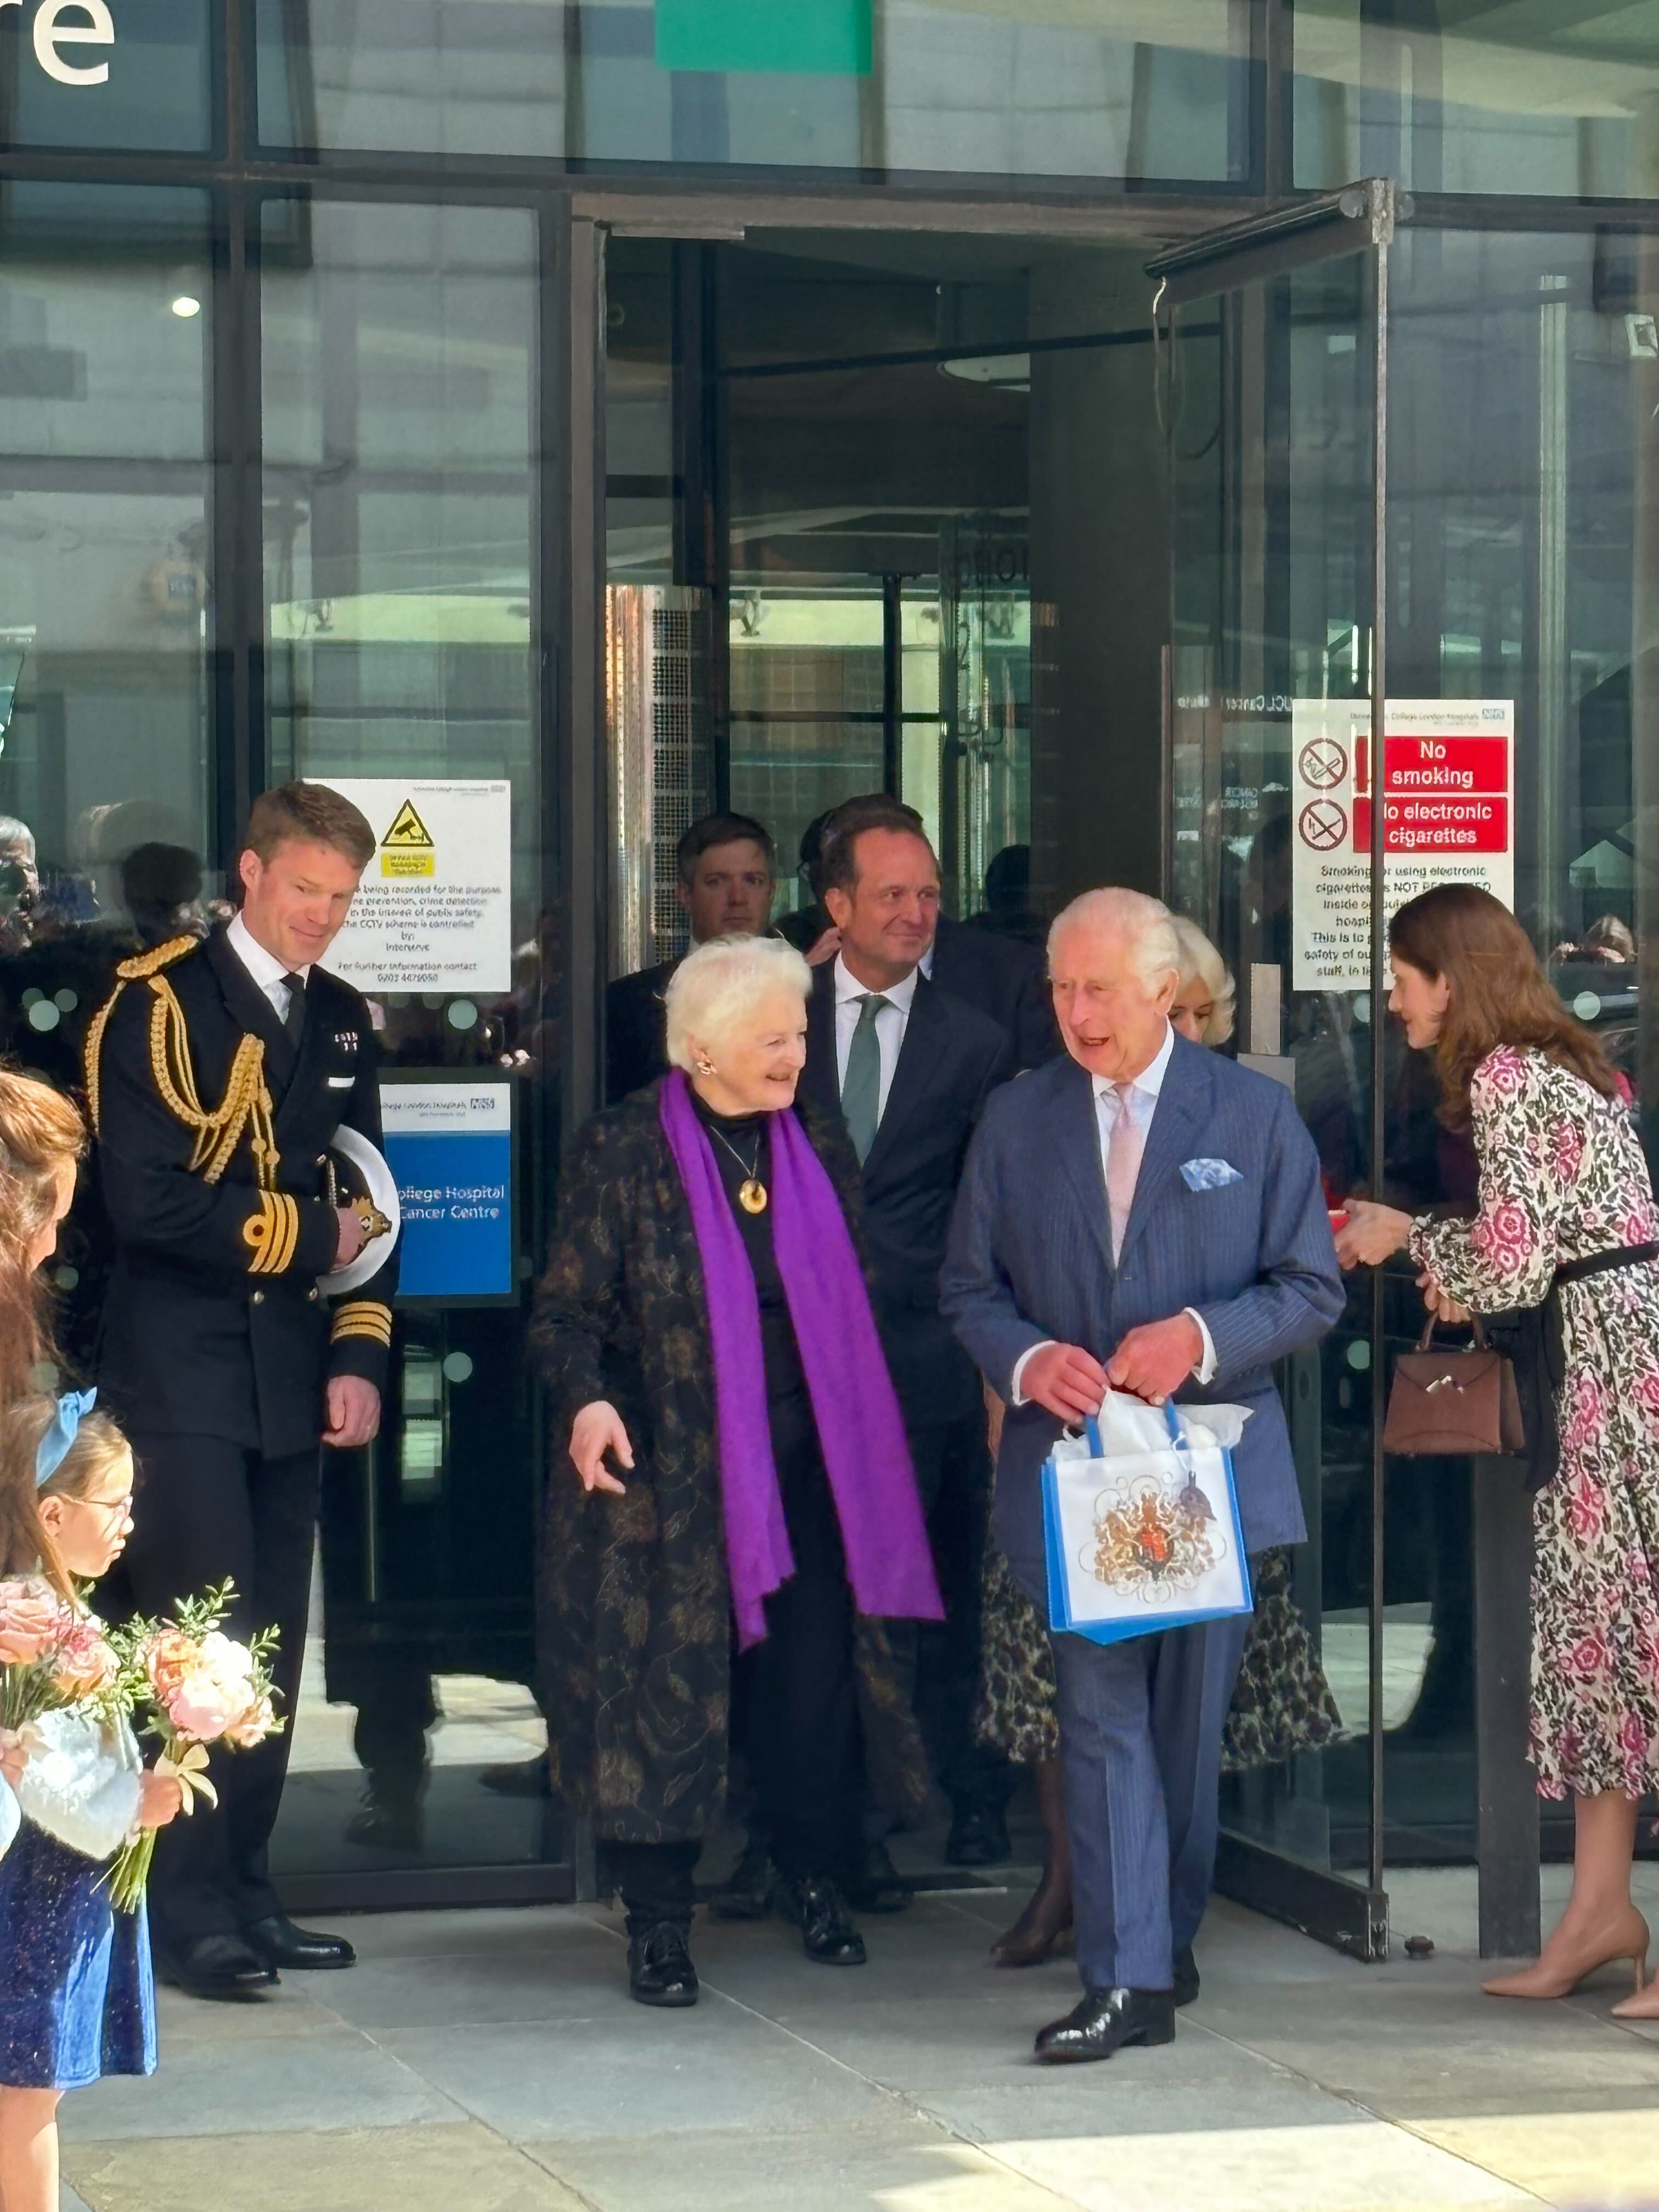 The King was all smiles at his first public engagement since his cancer diagnosis